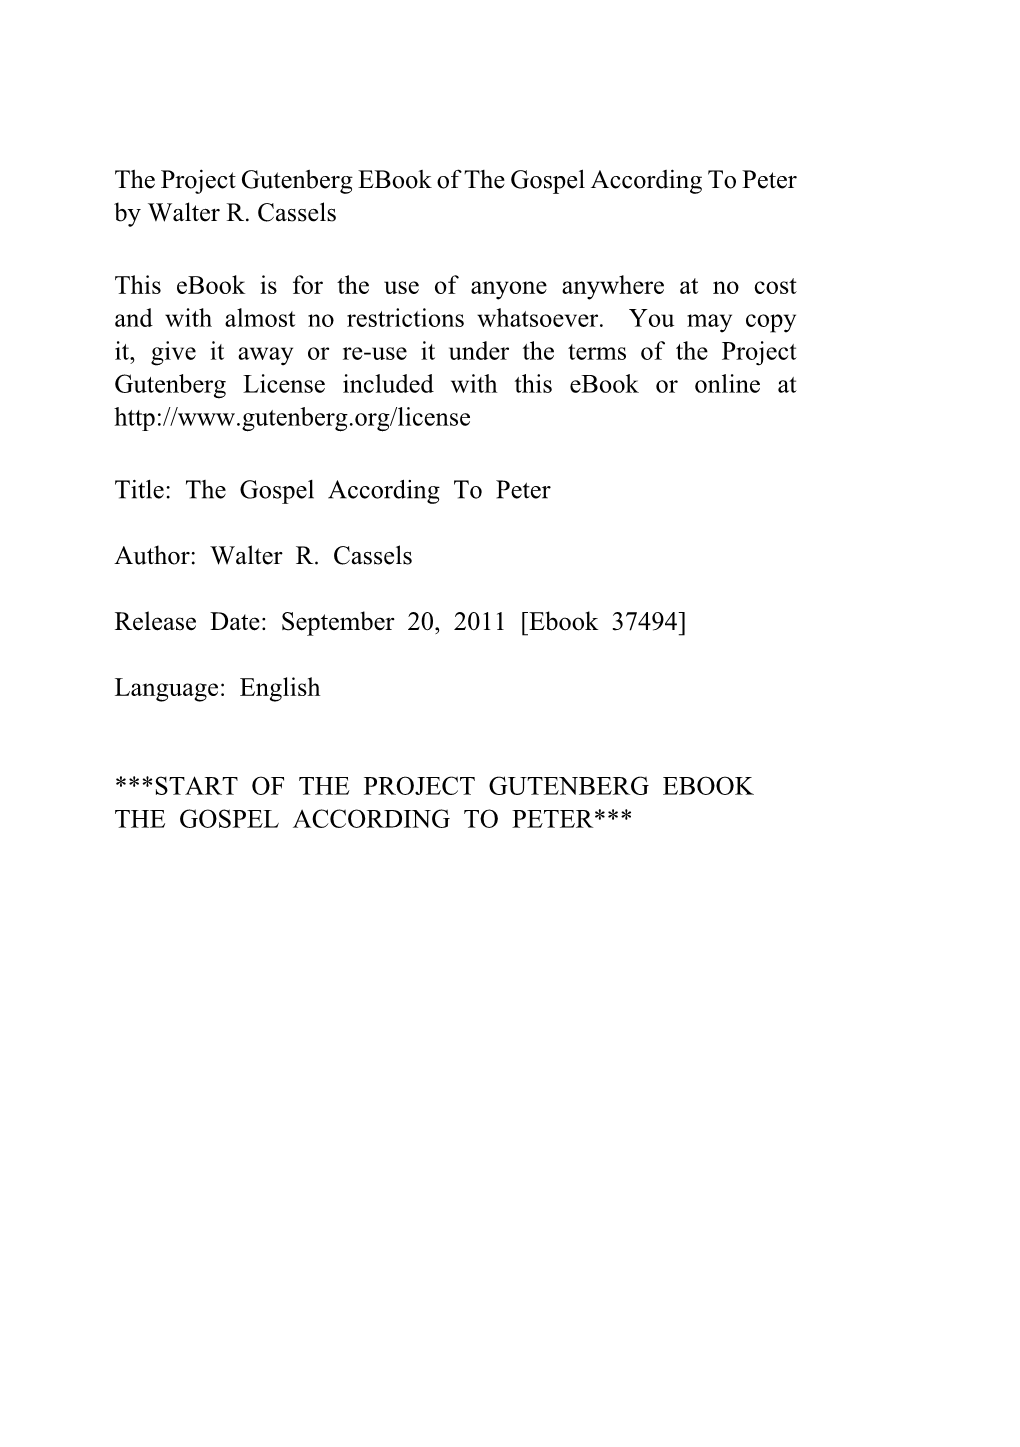 The Gospel According to Peter by Walter R